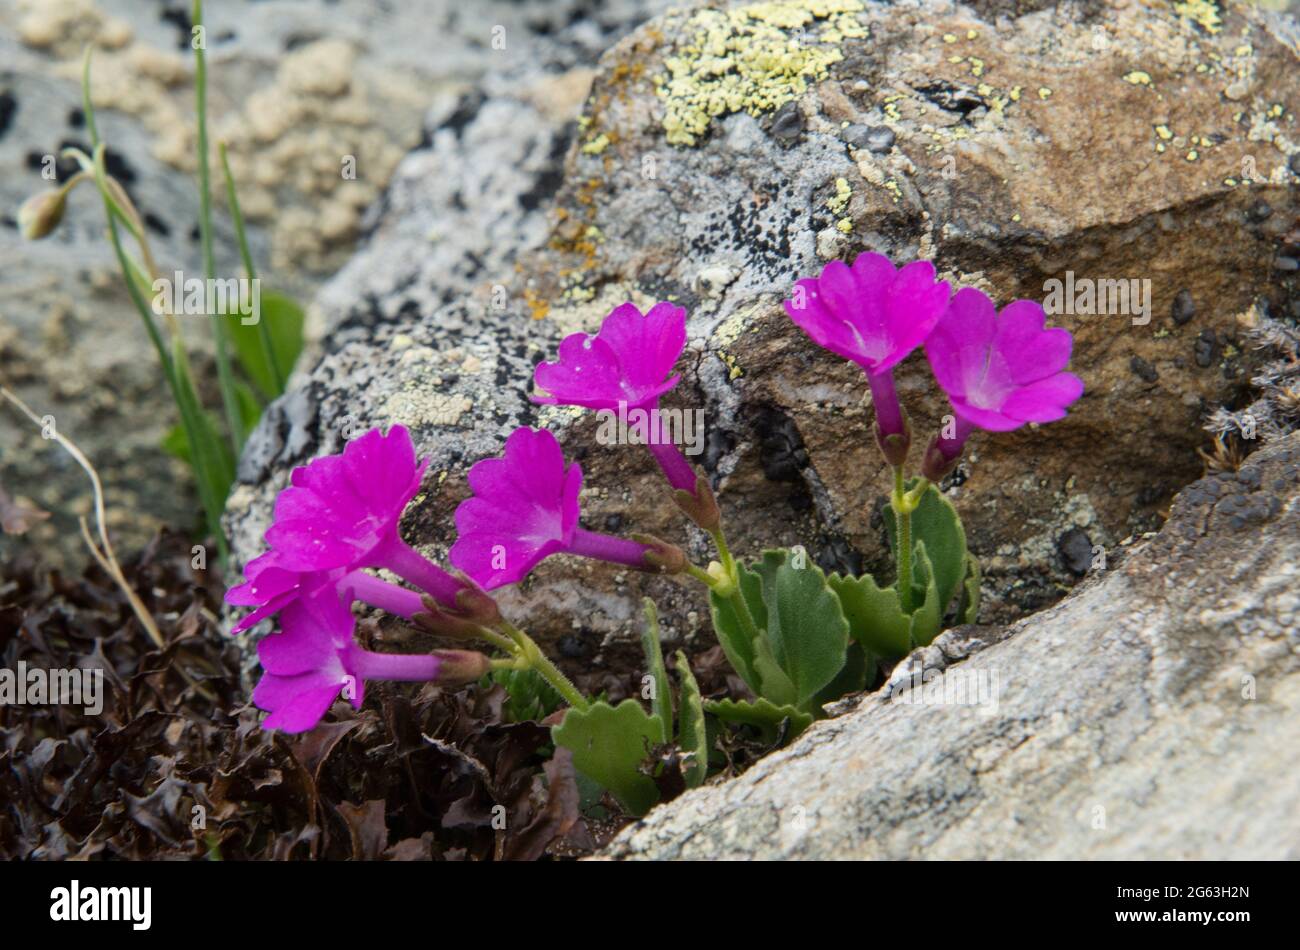 Primula hirsuta, also known as Pelzprimel or Chlebi, a small alpine plant, growing in its natural environment Stock Photo